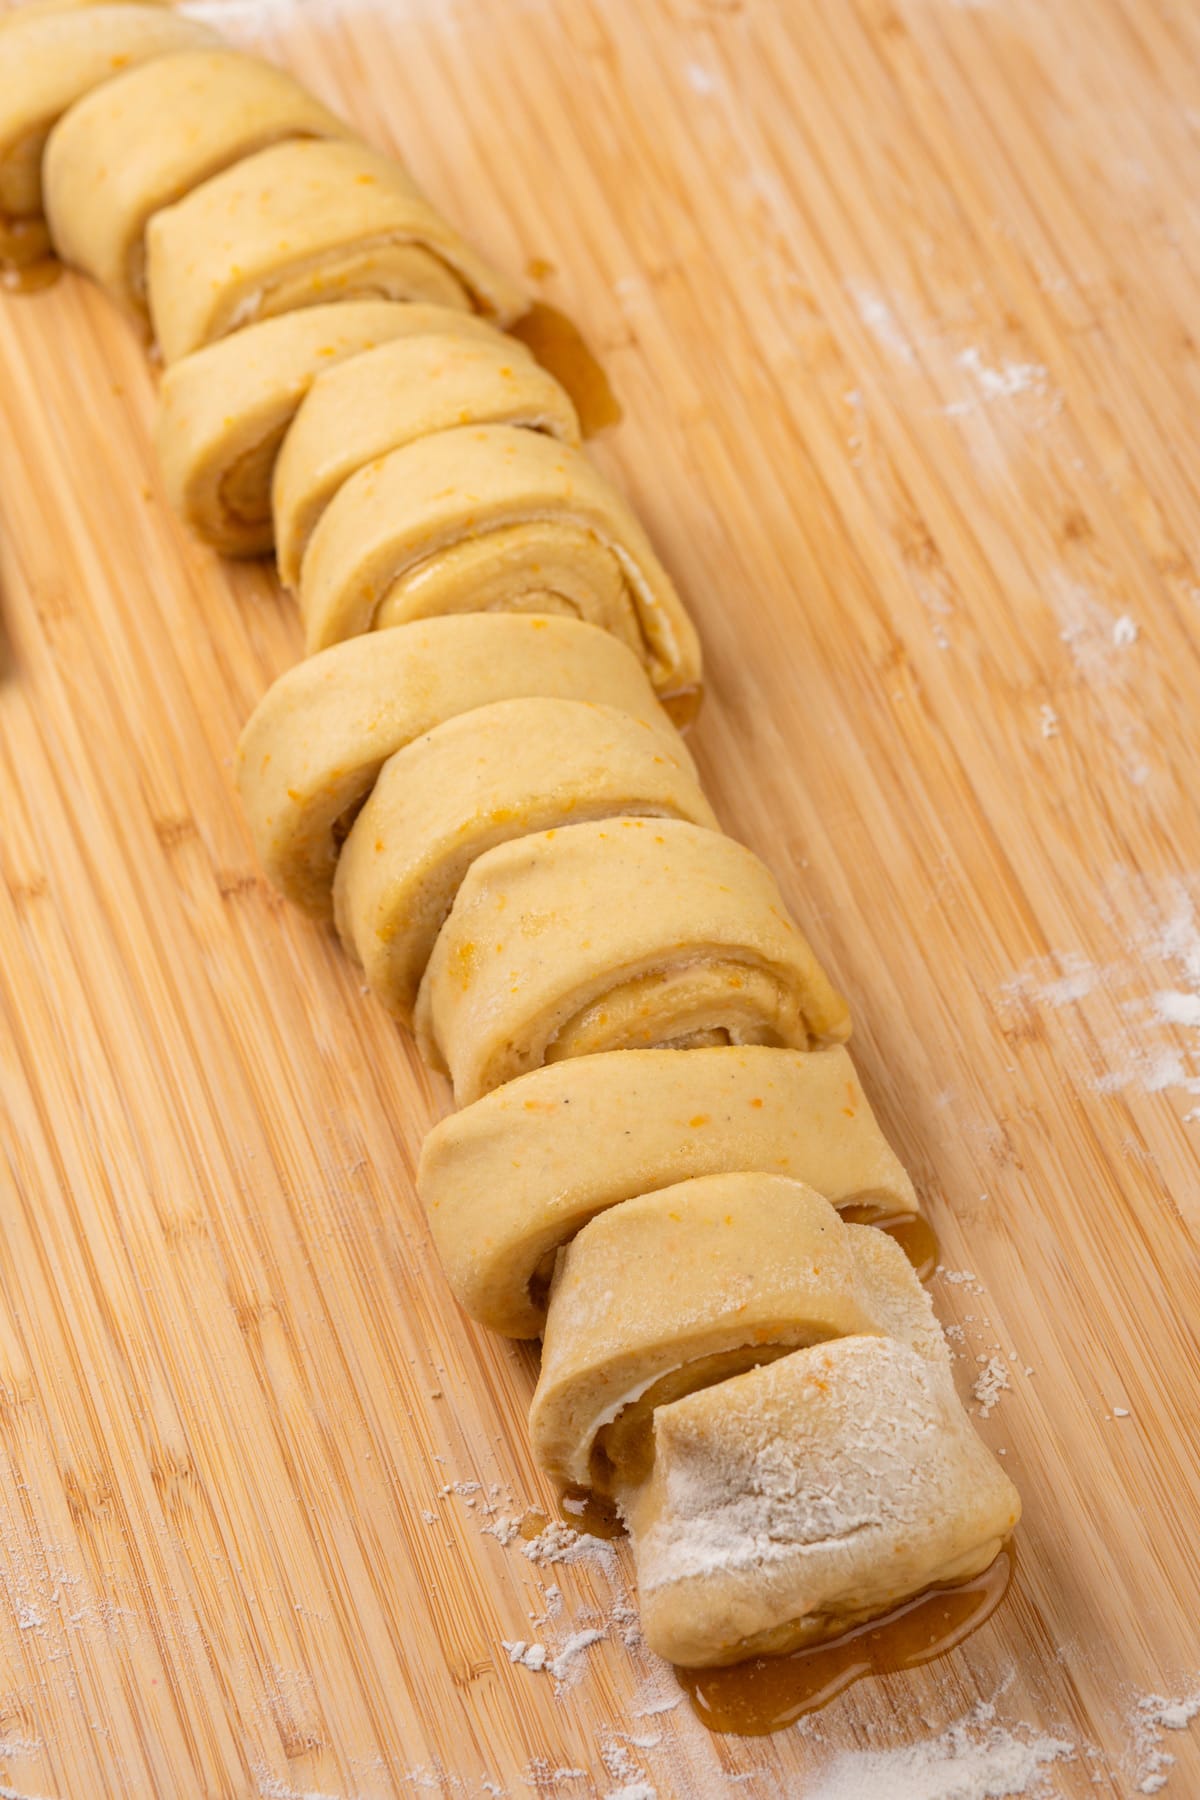 Rolled and sliced orange rolls, ready to be placed in a baking dish.